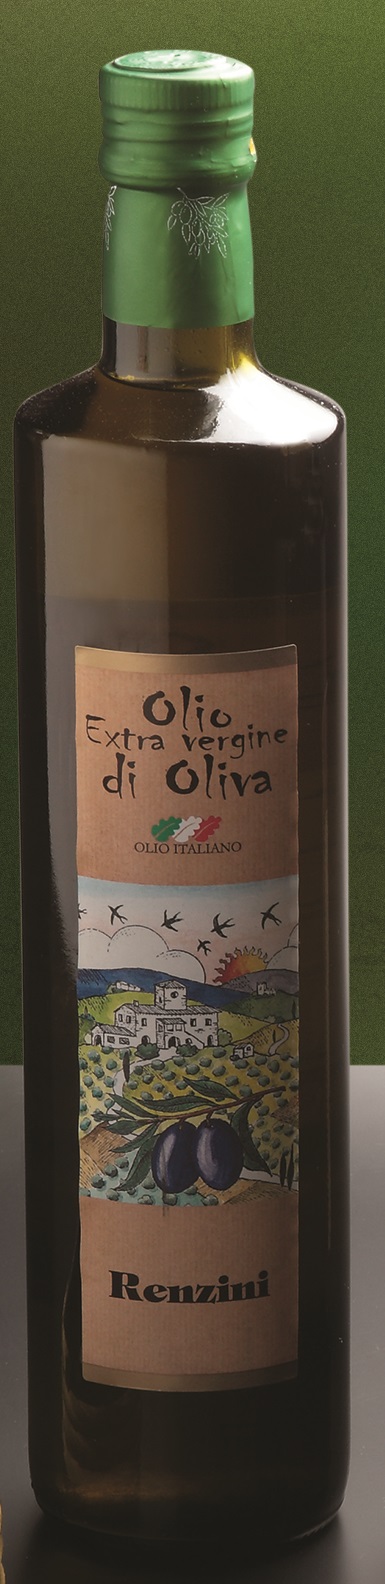 HUILE D'OLIVE EXTRA VIERGE (Ombrie) "Le Rondini" 750 ml